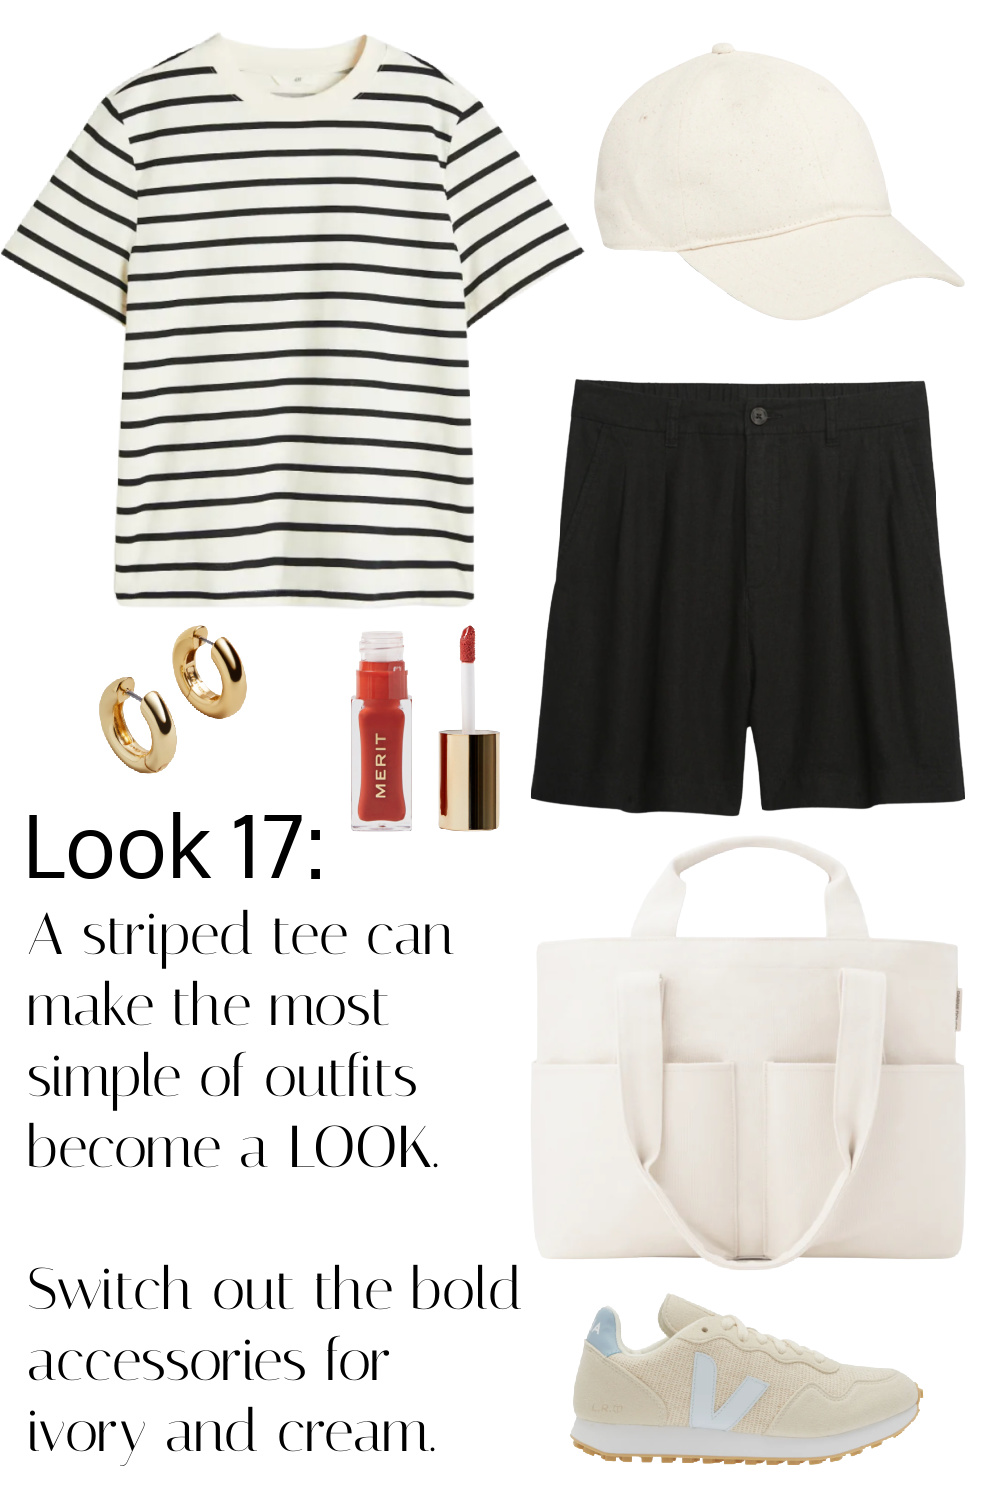 Same outfit but instead of the orange crossbody and black leather flats it is styled with the cream canvas tote, cream sneakers, and cream baseball cap. A striped tee can make the most simple of outfits become a LOOK. Switch out the bold accessories for ivory and cream.